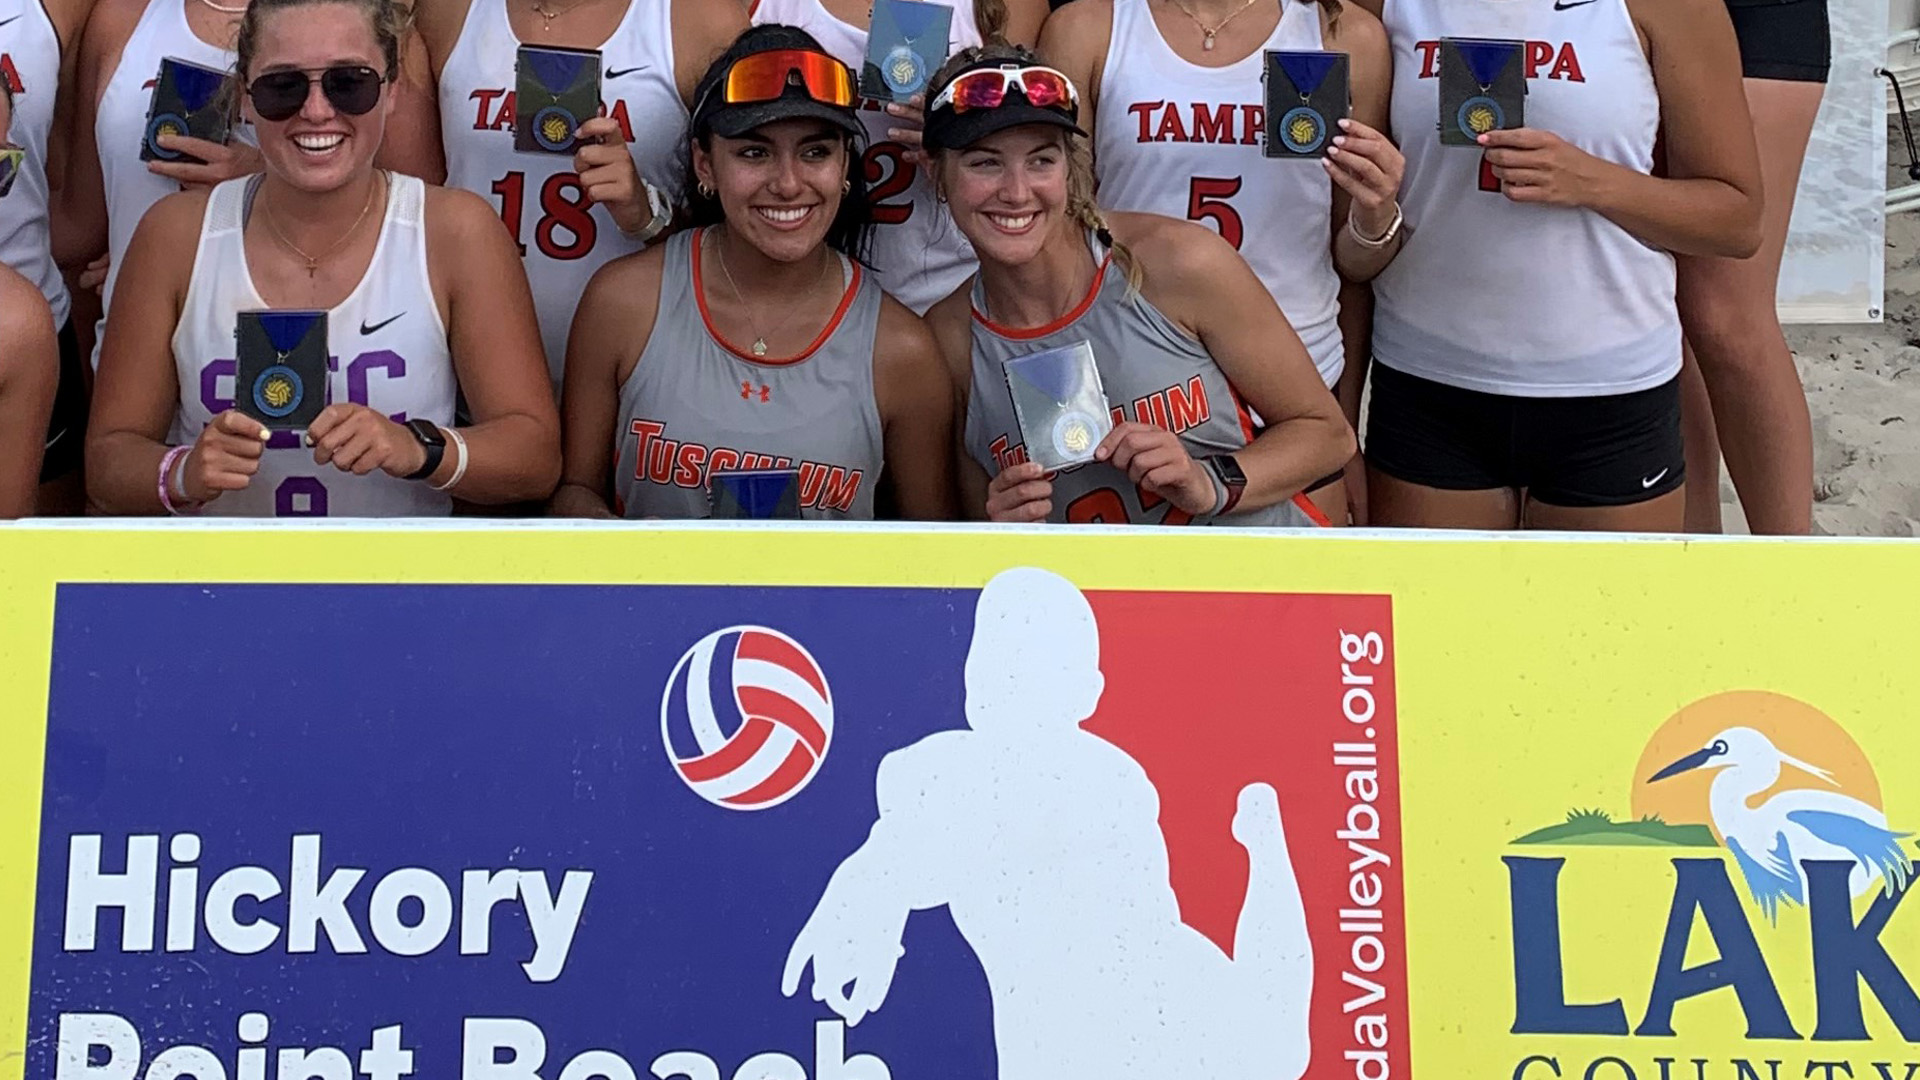 Pioneer pair highlight day one of AVCA event